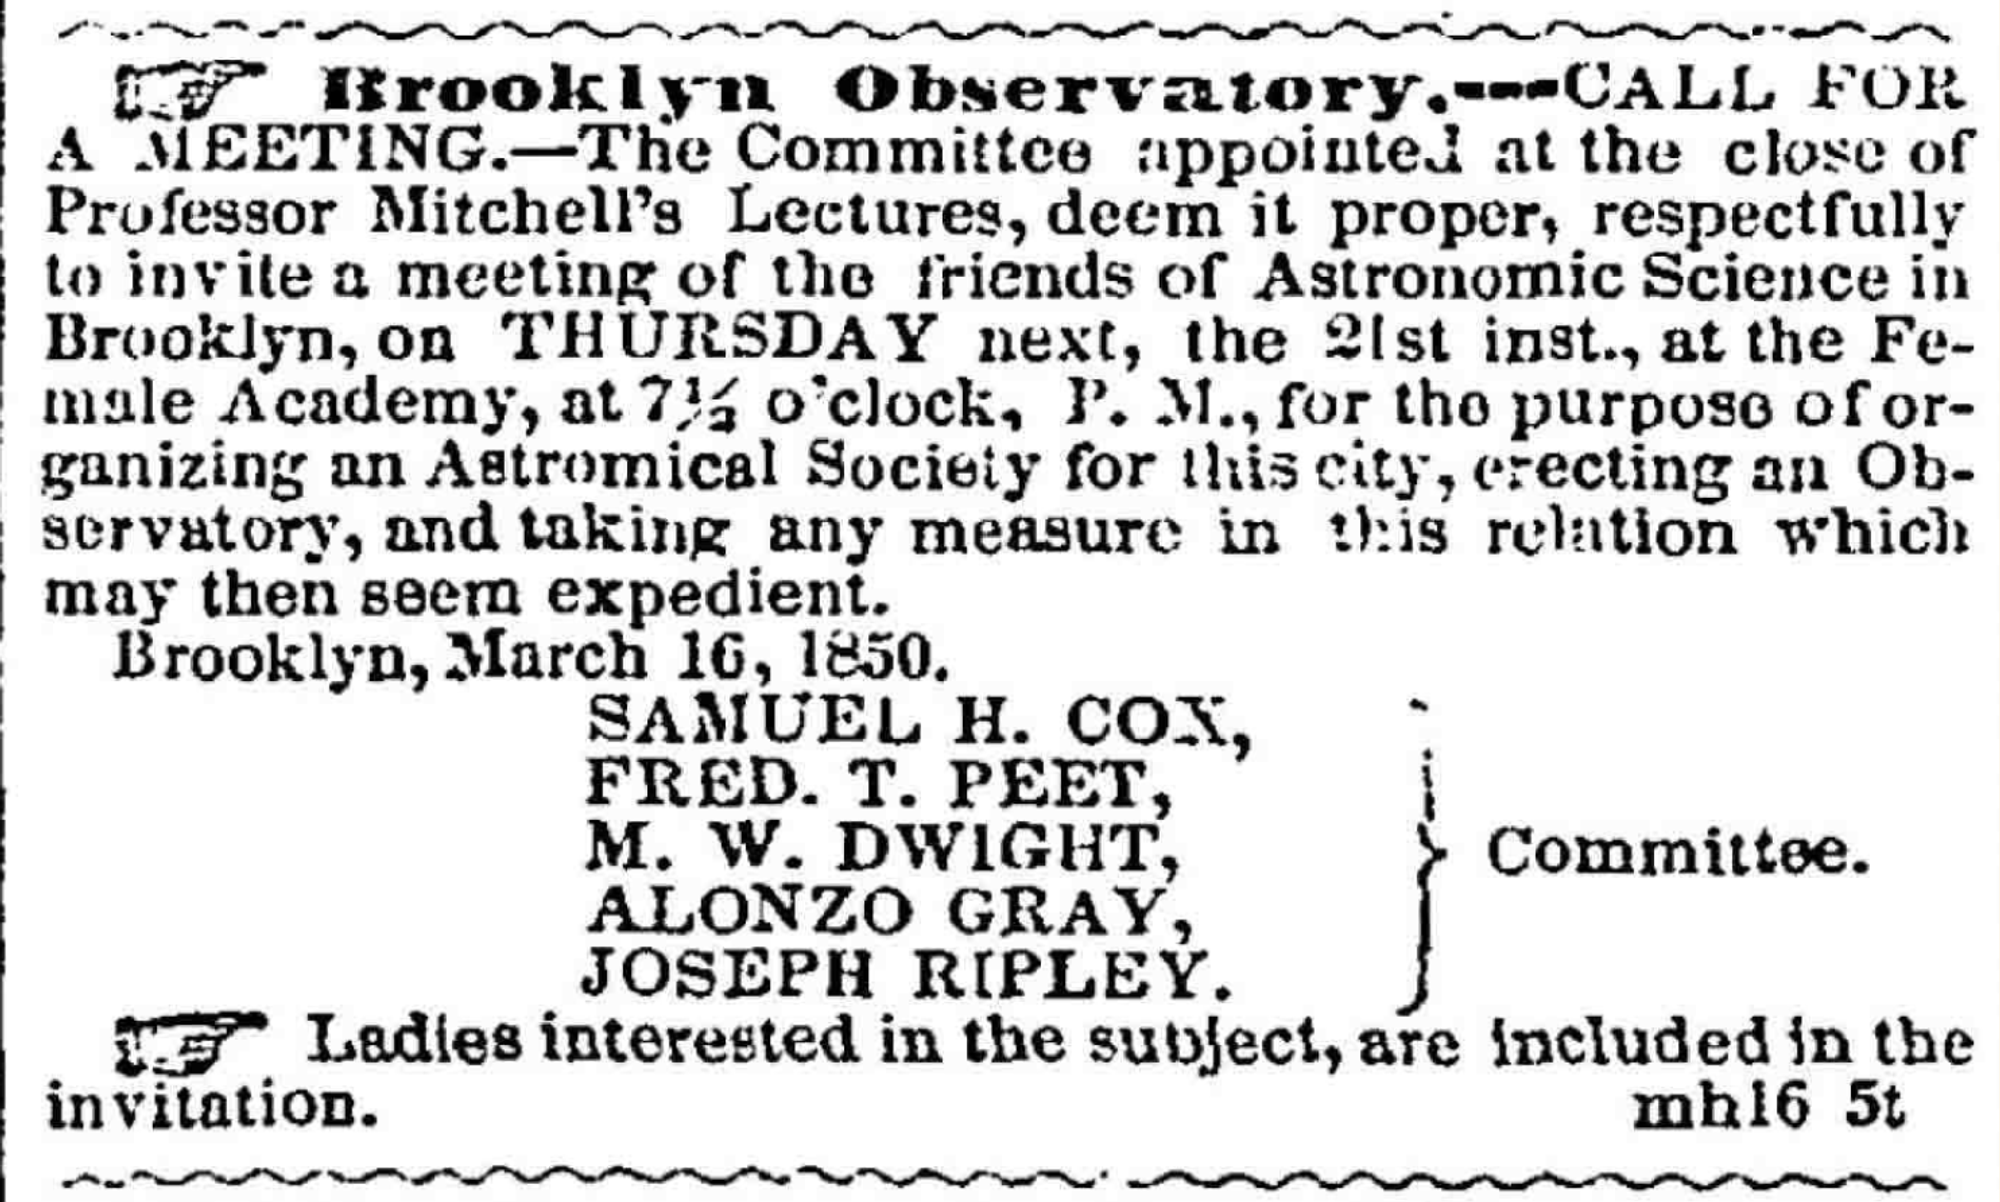 An old classified ad for a "Brooklyn Observatory"